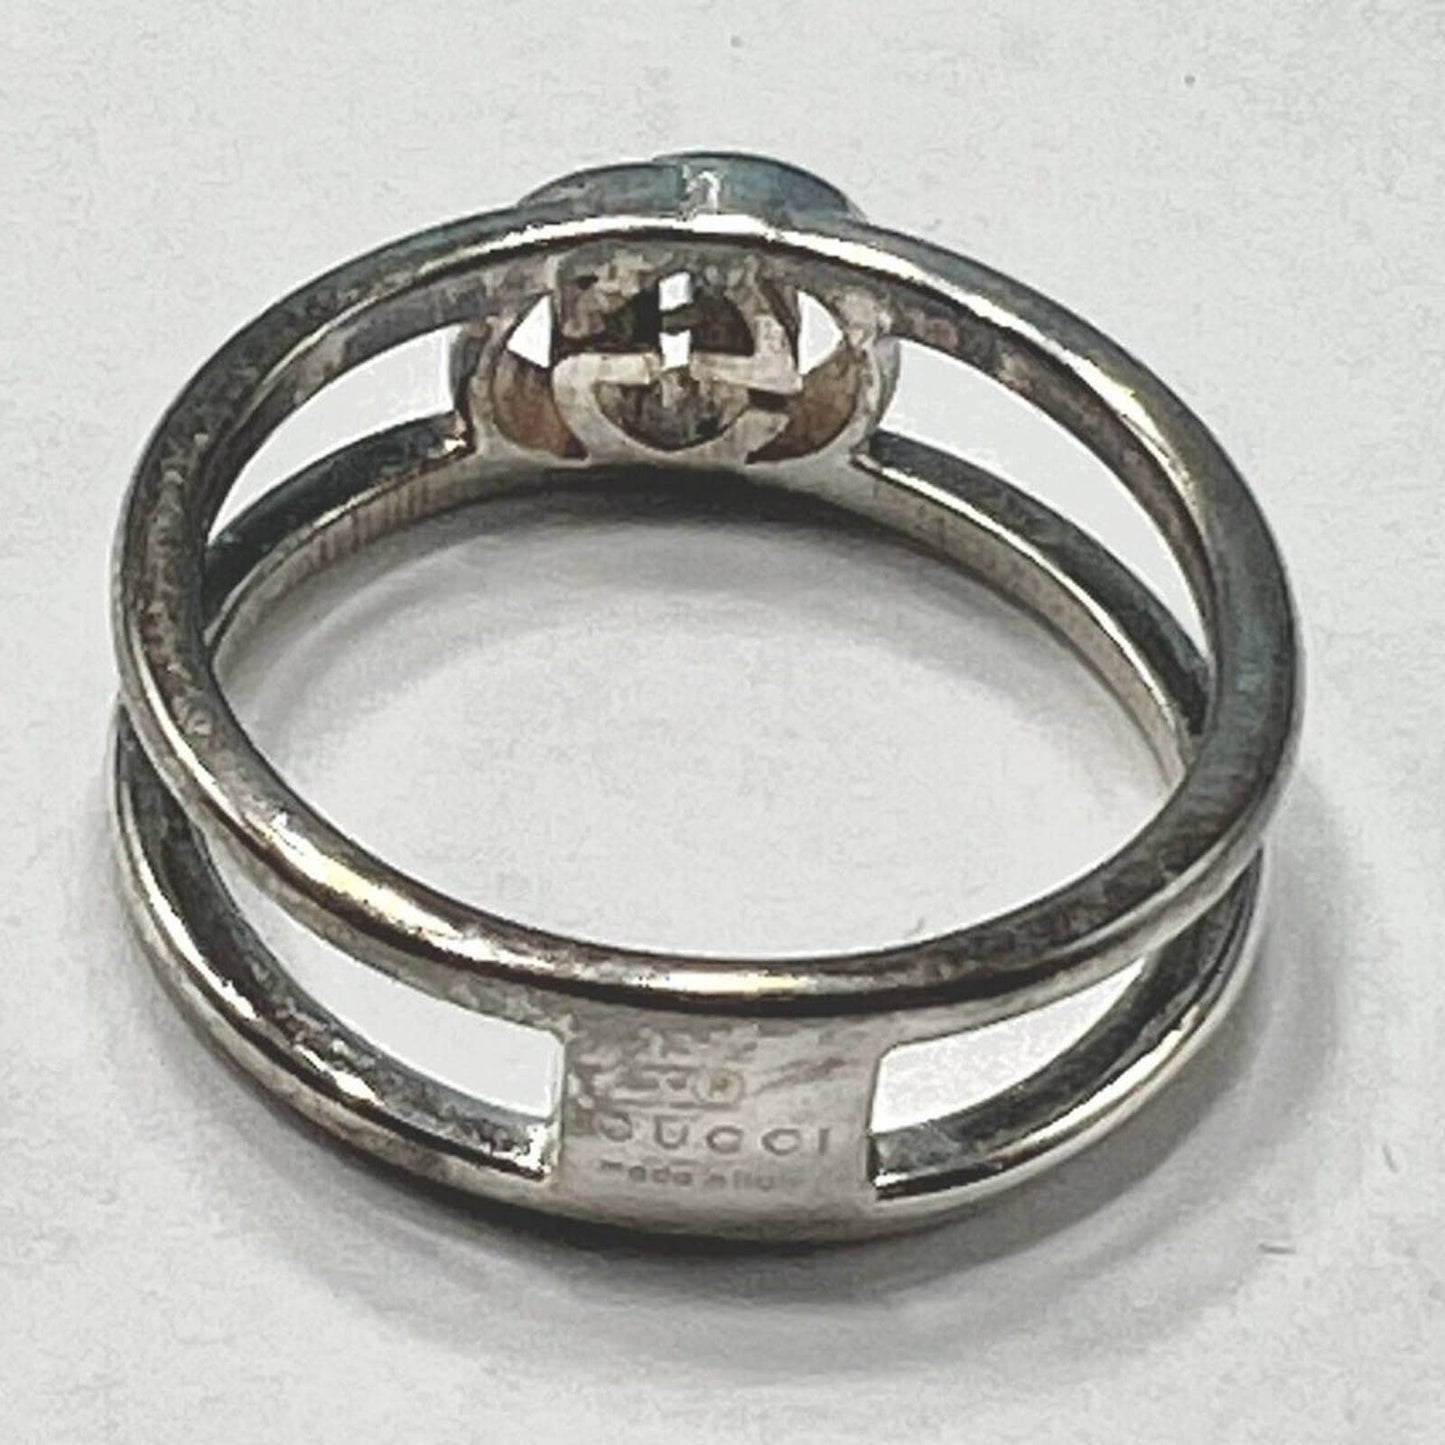 Gucci Double G Ring 925 Sterling Silver Size 12 (US 6)